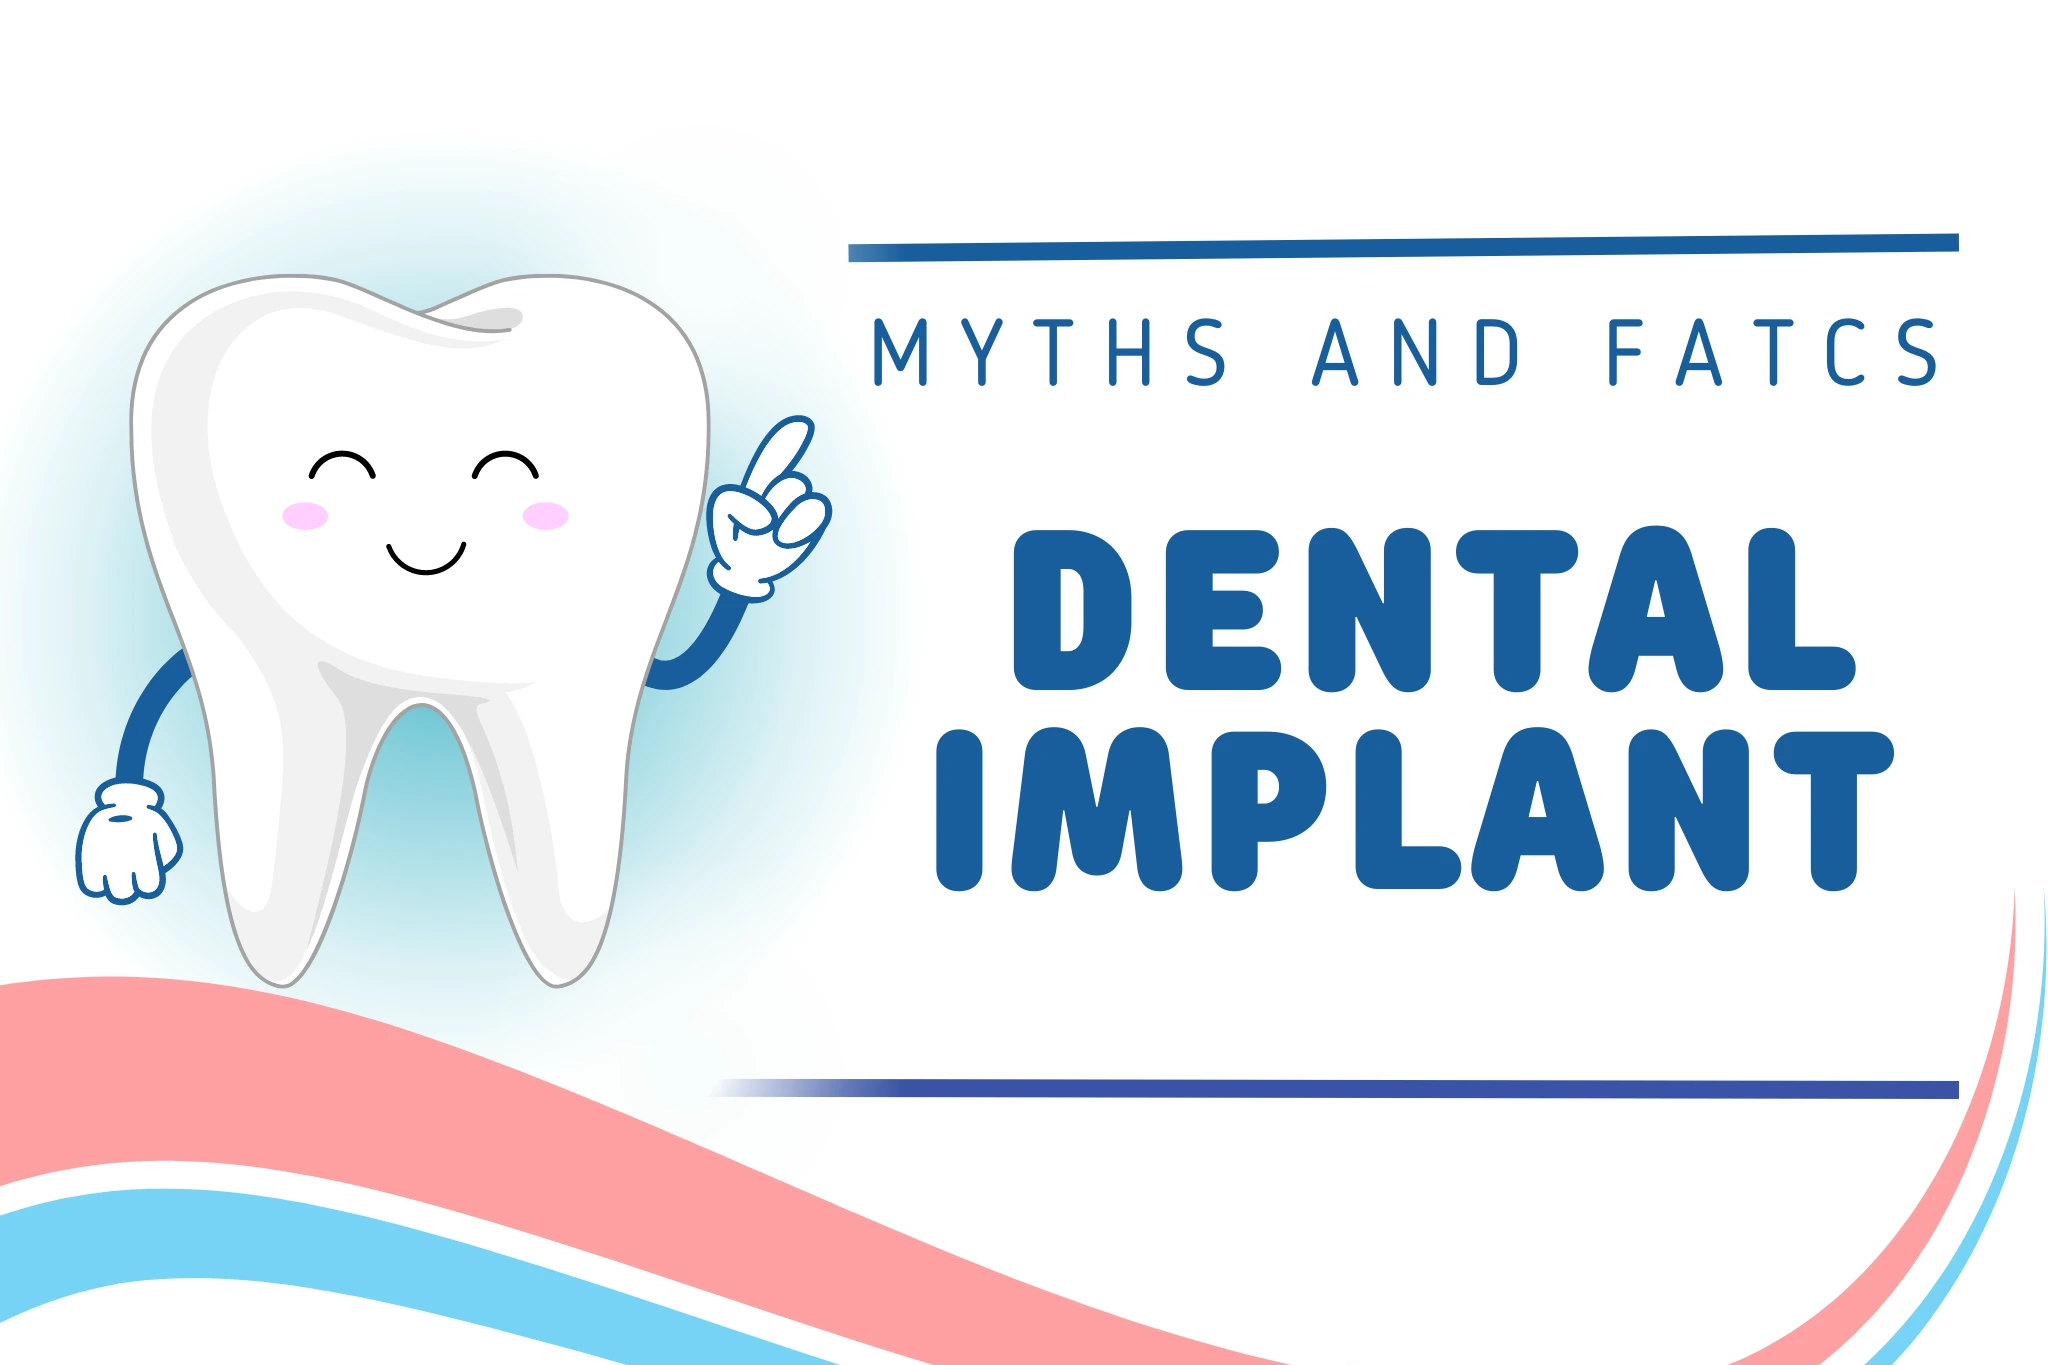 Dental Implant myths and facts